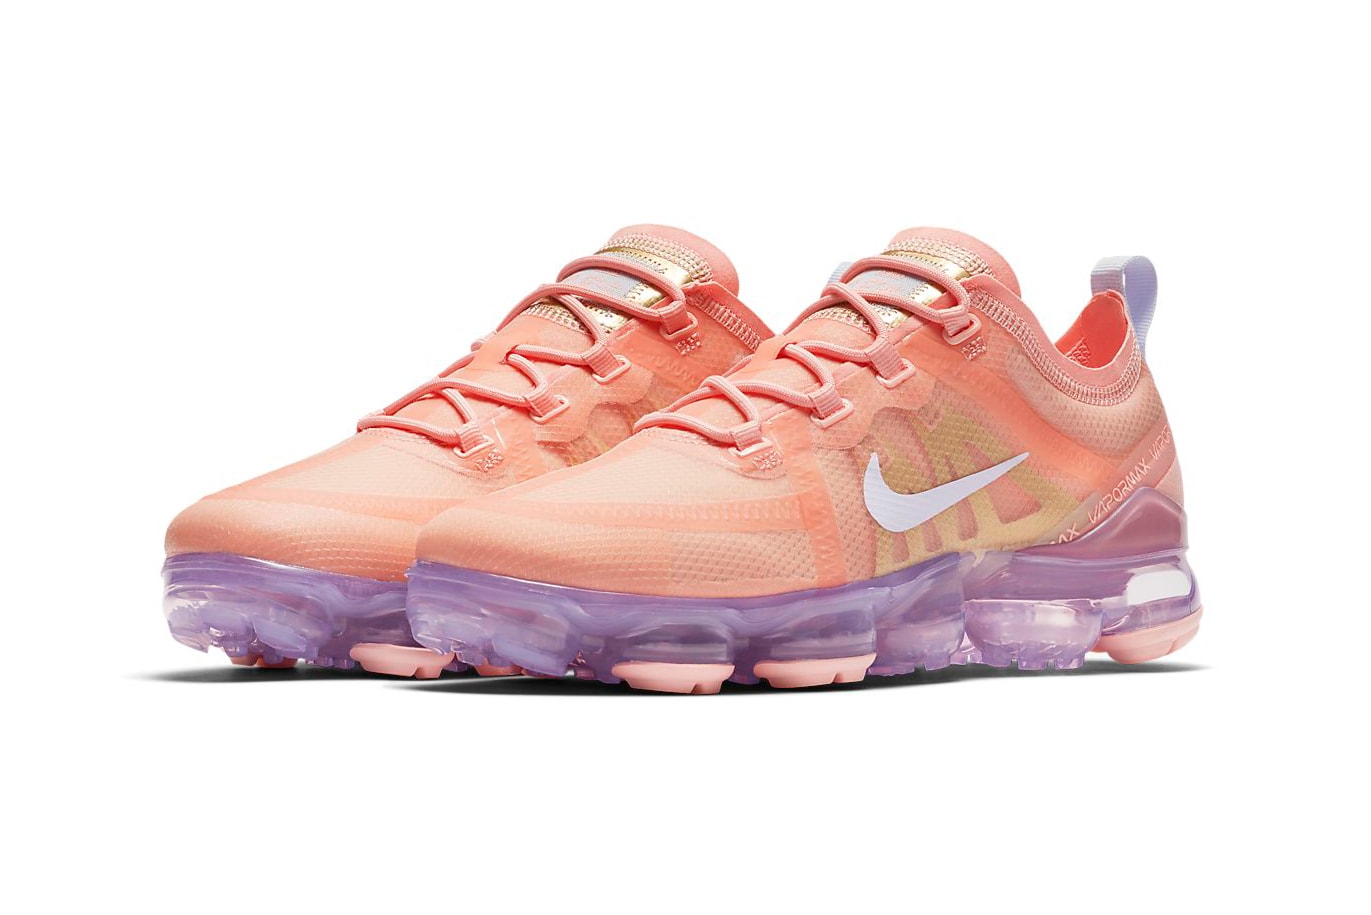 Nike Air VaporMax 2019 Bleached Coral Lilac Amethyst Tint Sneakers Trainers